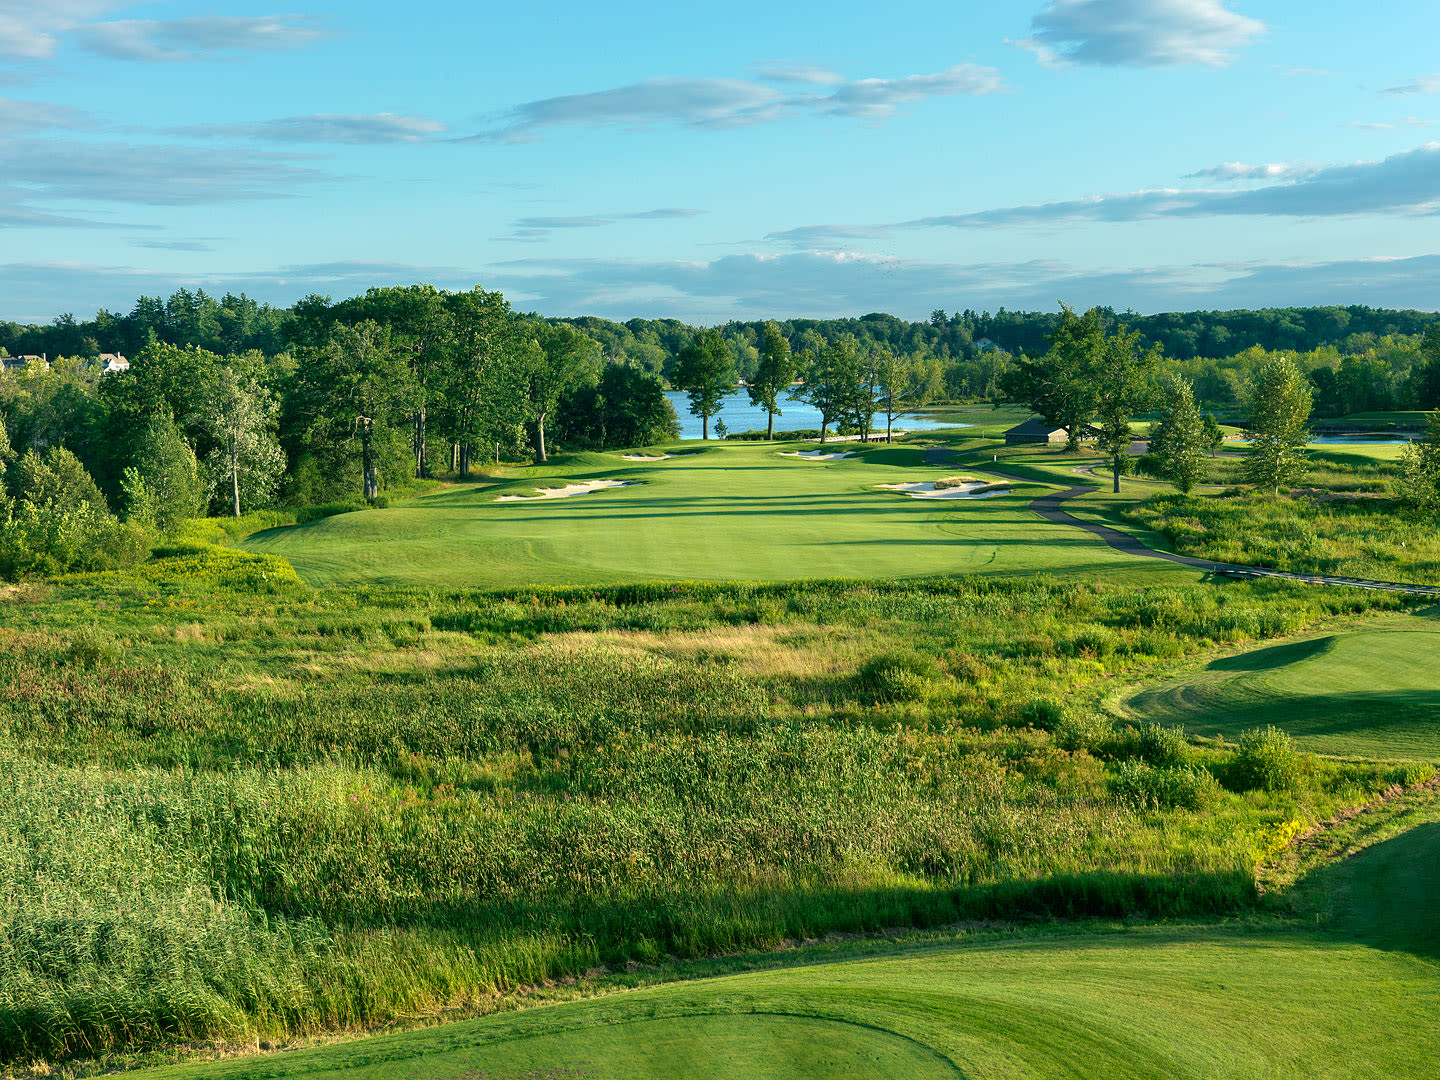 The 14th hole at Saratoga National. (Photo by Evan Schiller)